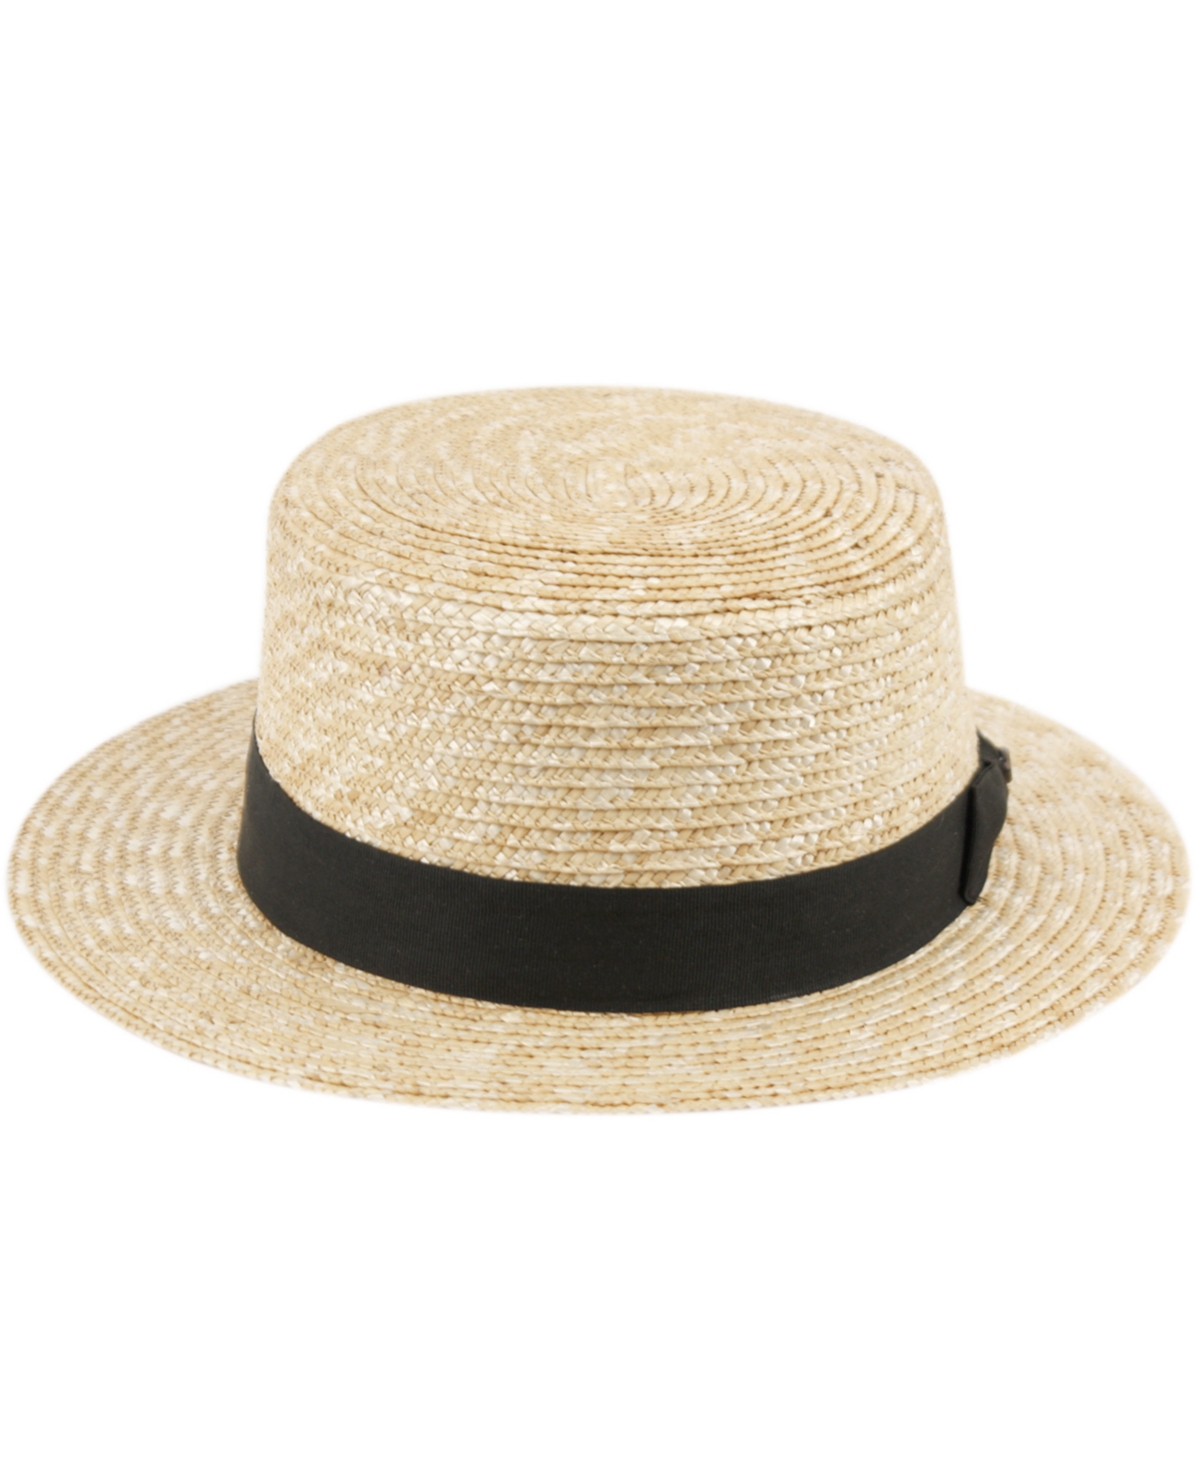 Epoch Hats Company Unisex Straw Skimmer Boater Hat In Natural